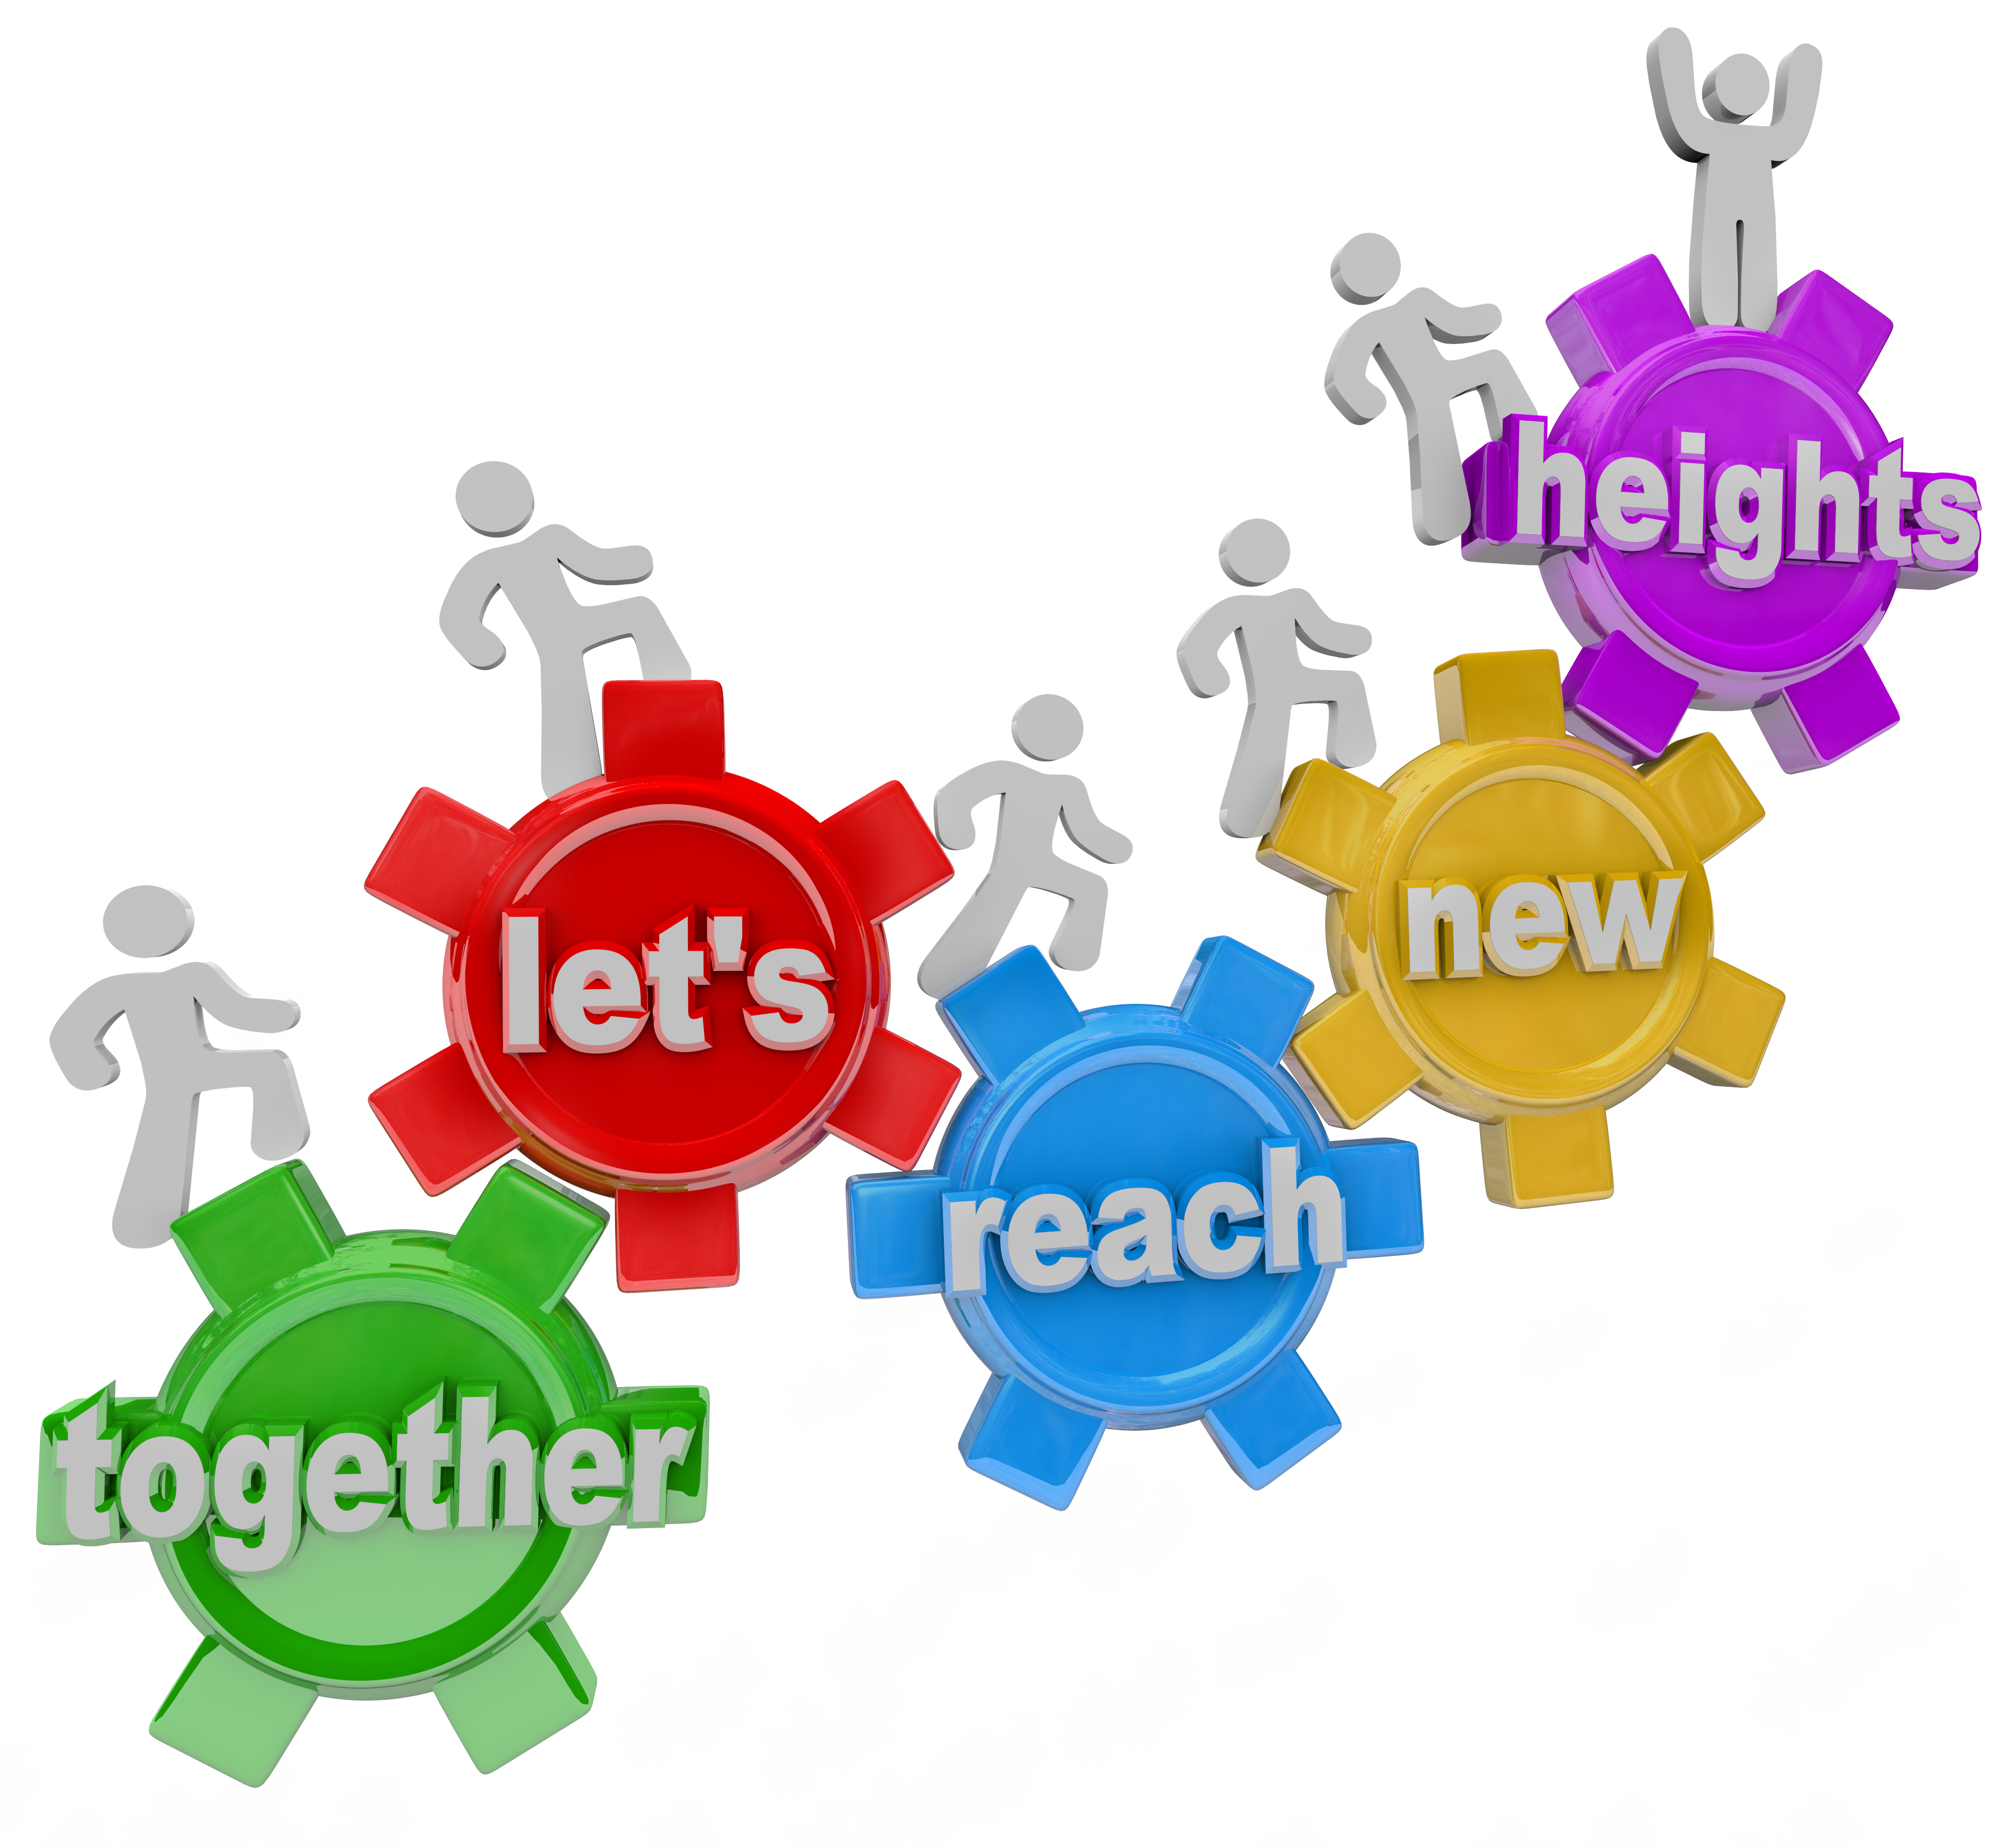 free clipart images teamwork - photo #25